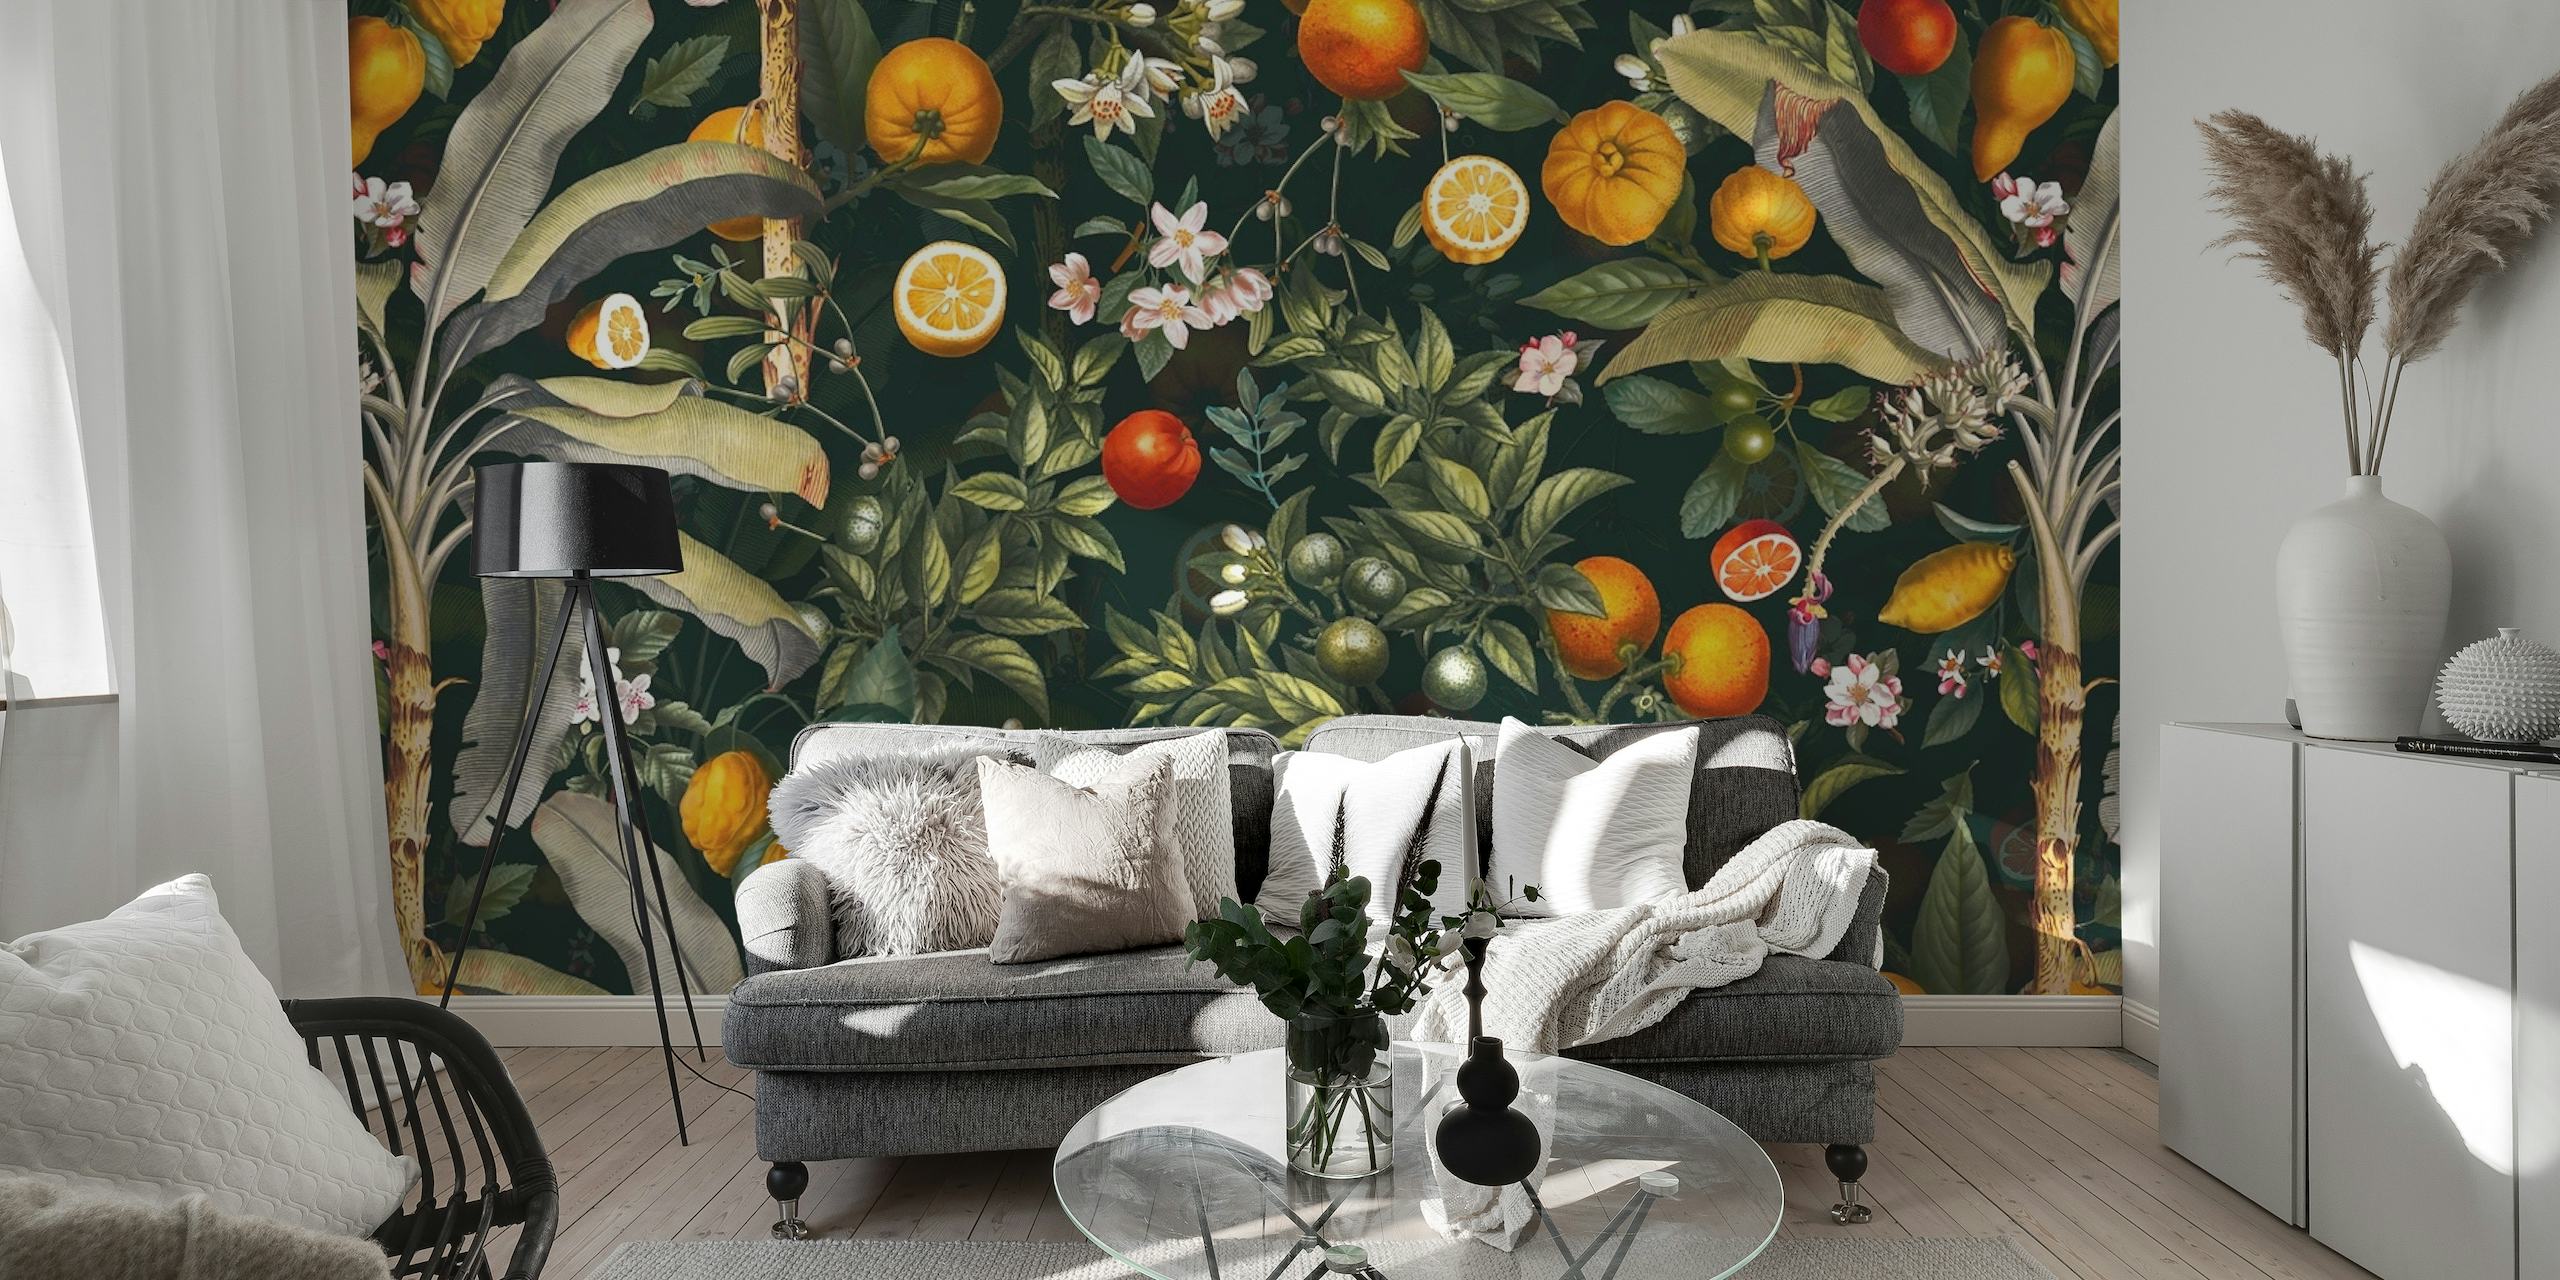 Vintage-style wall mural with illustrated fruits and foliage.